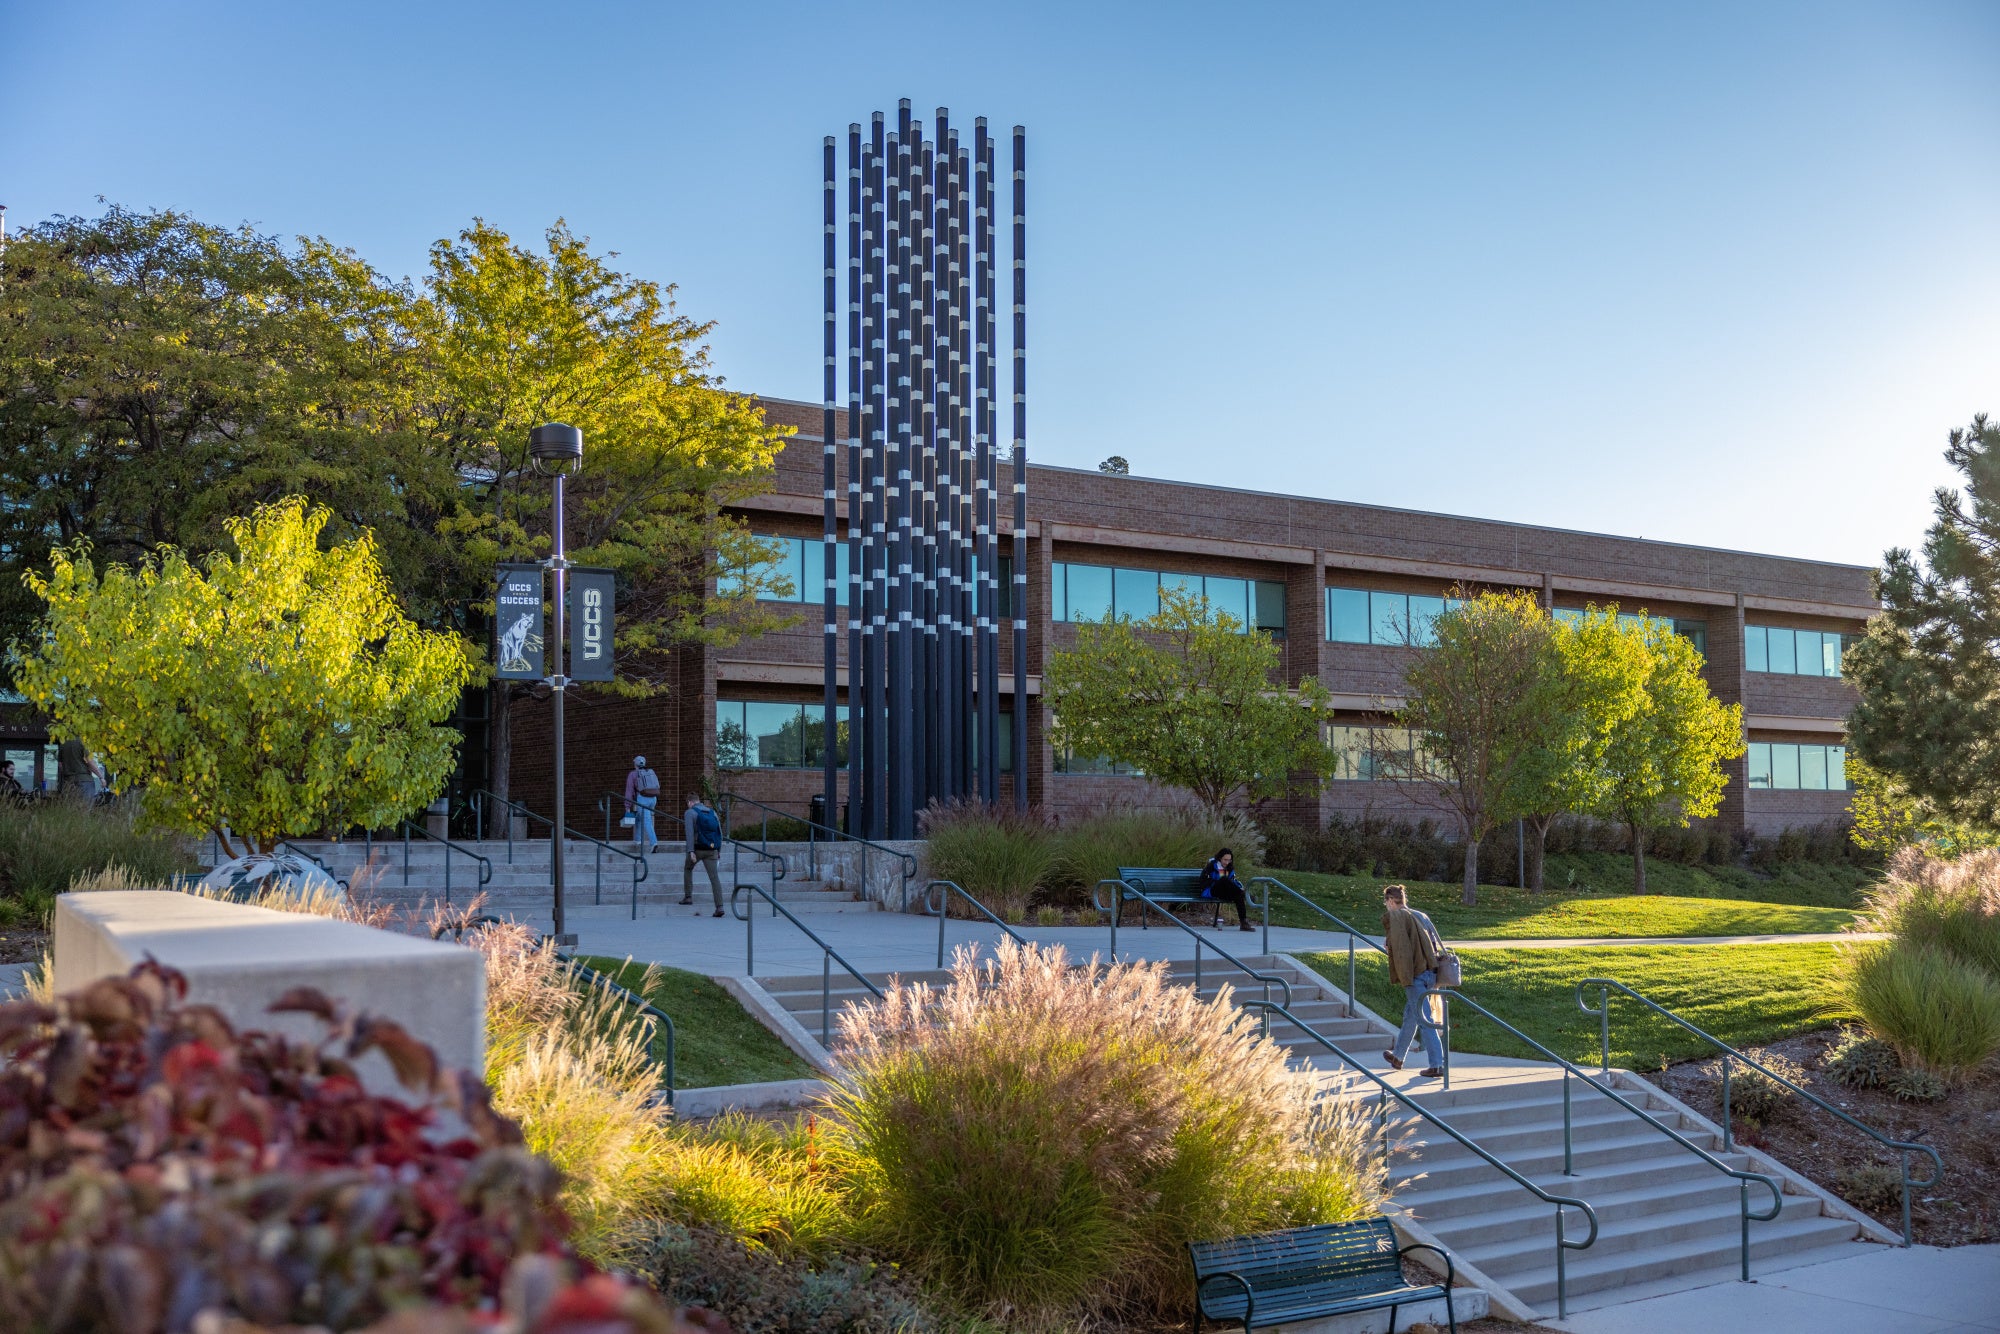 Engineering Building on UCCS Campus